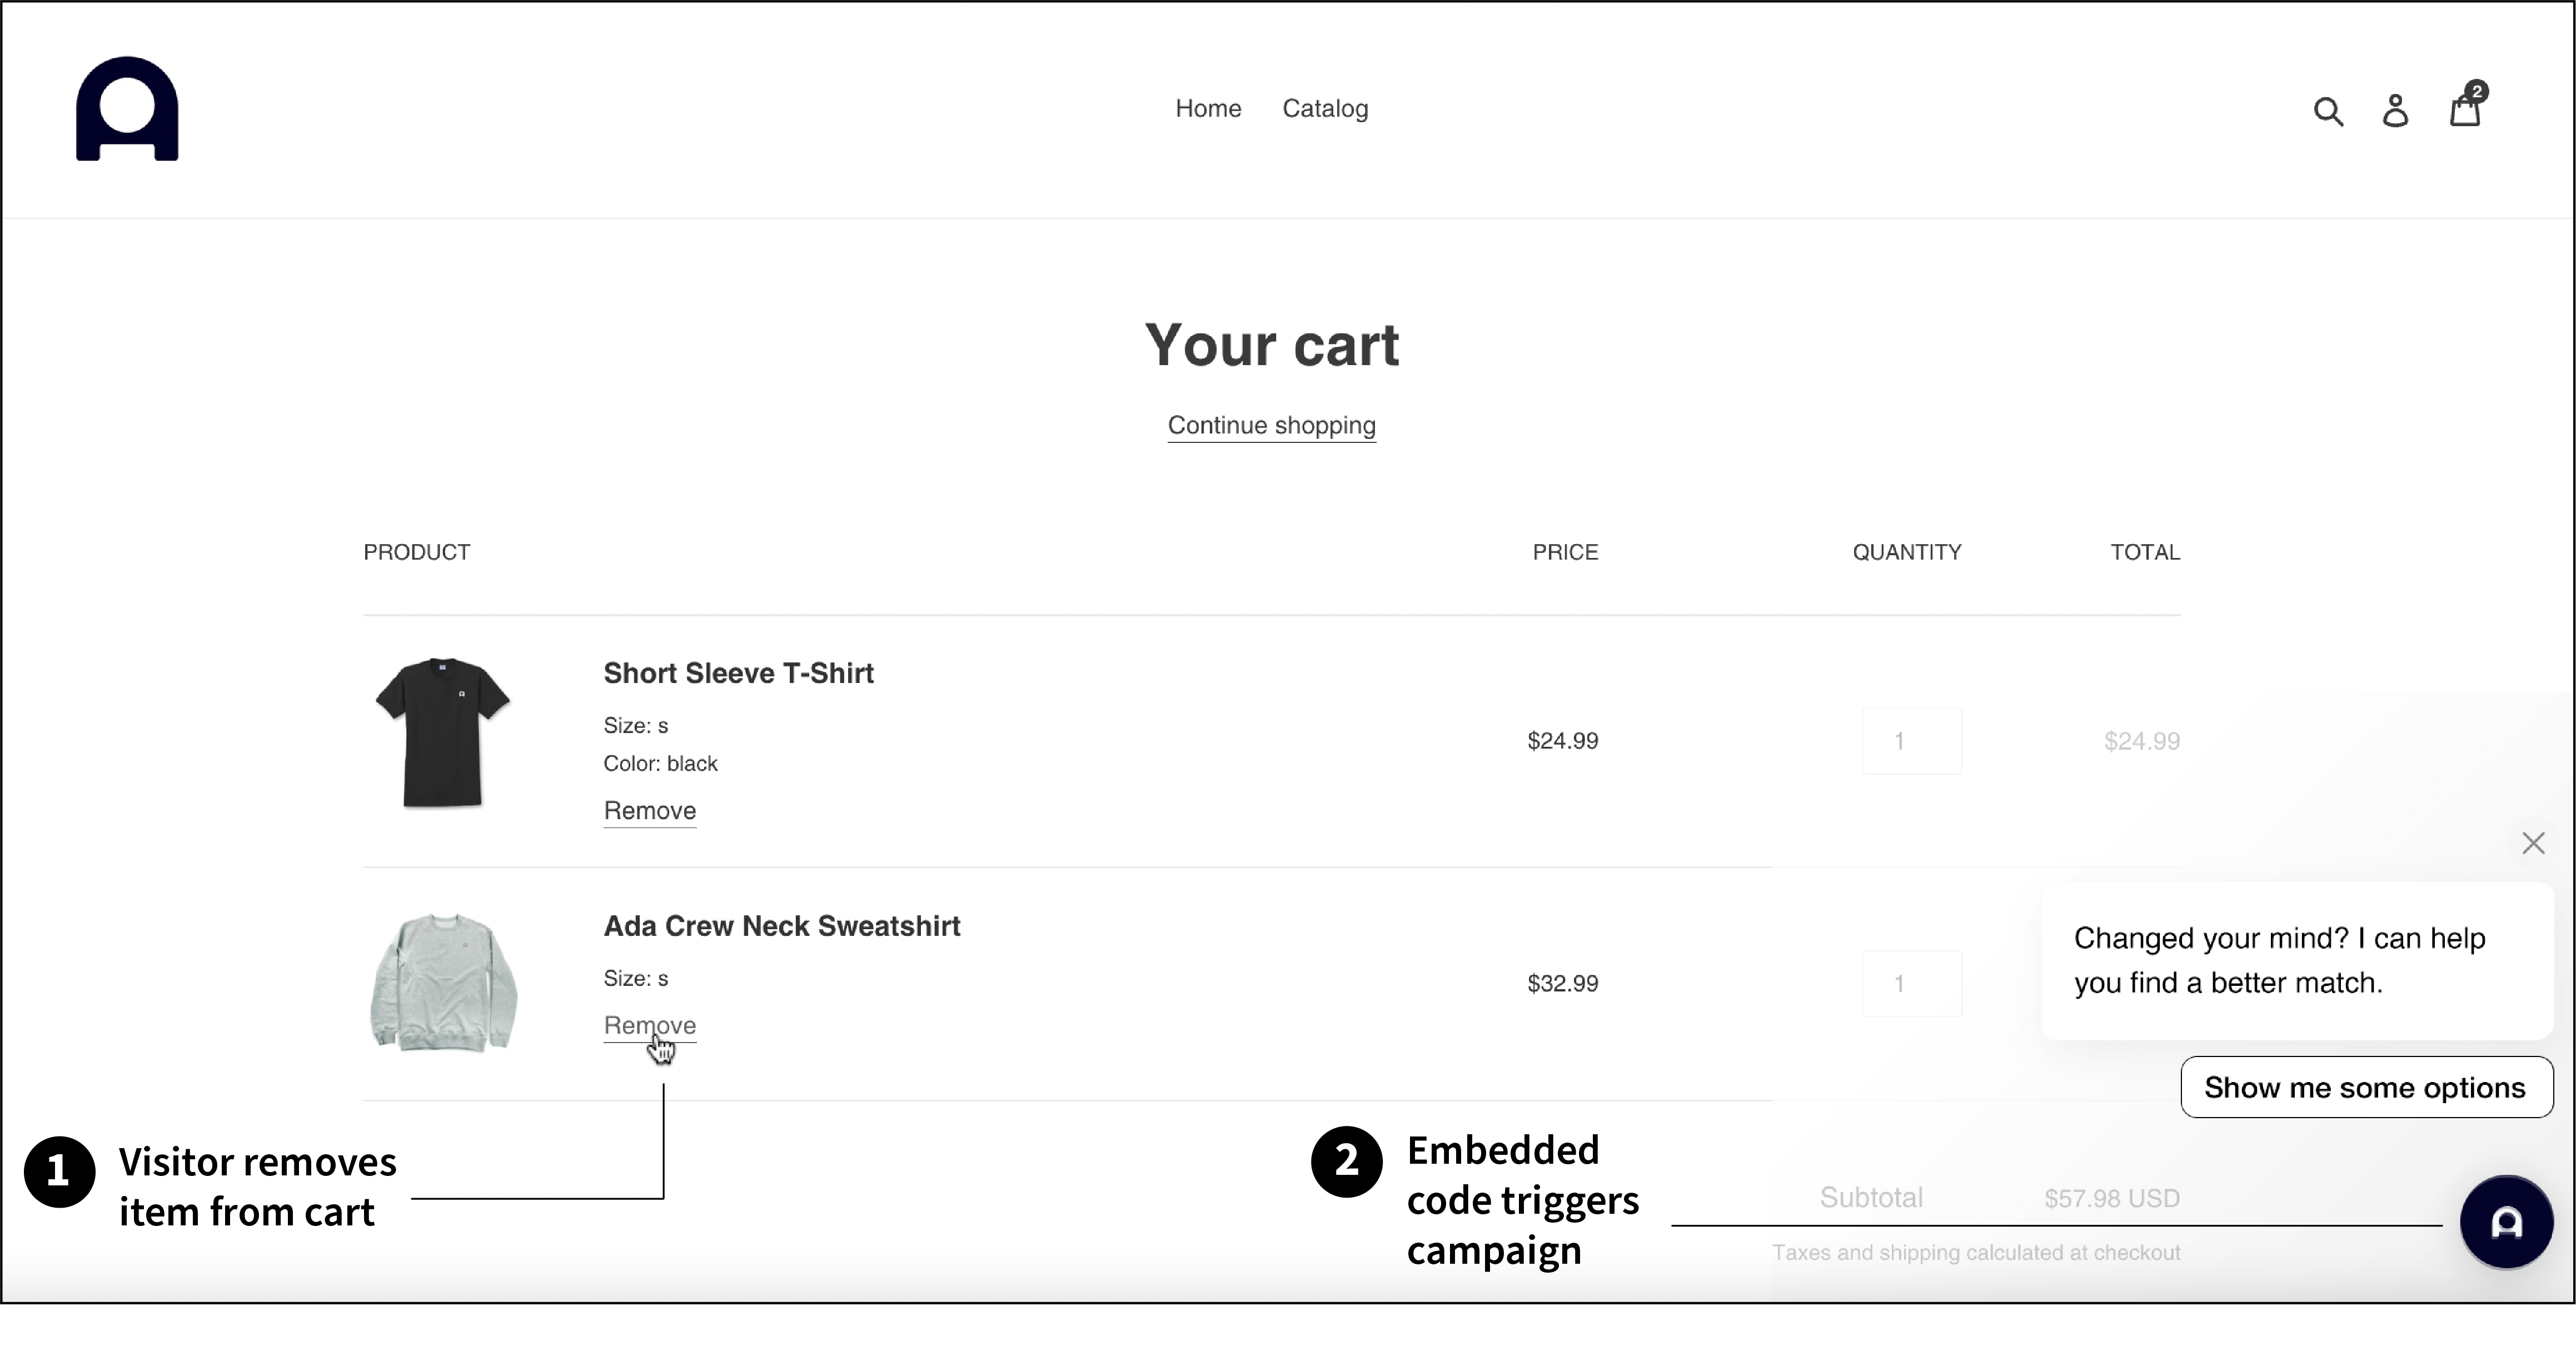 Removing items from cart triggers a campaign